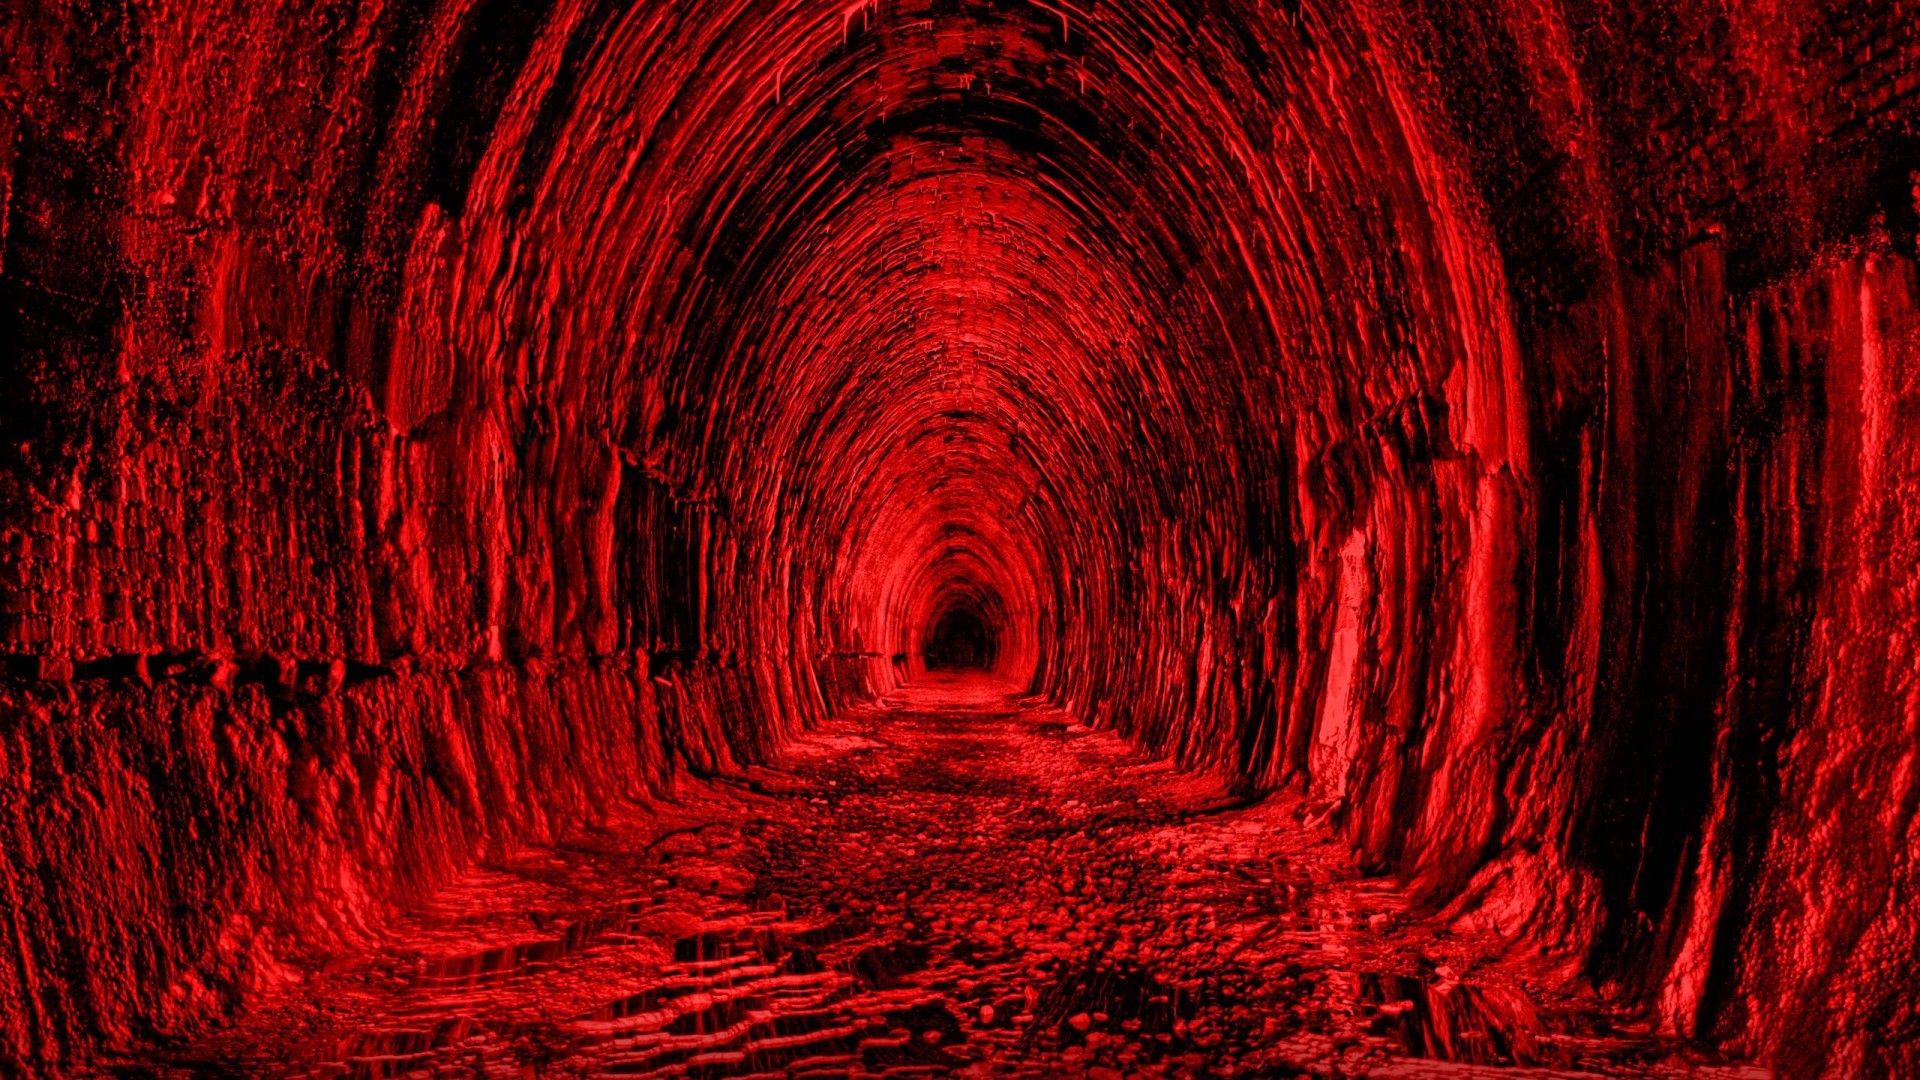 blood aesthetic wallpapers wallpaper cave on blood aesthetic wallpapers